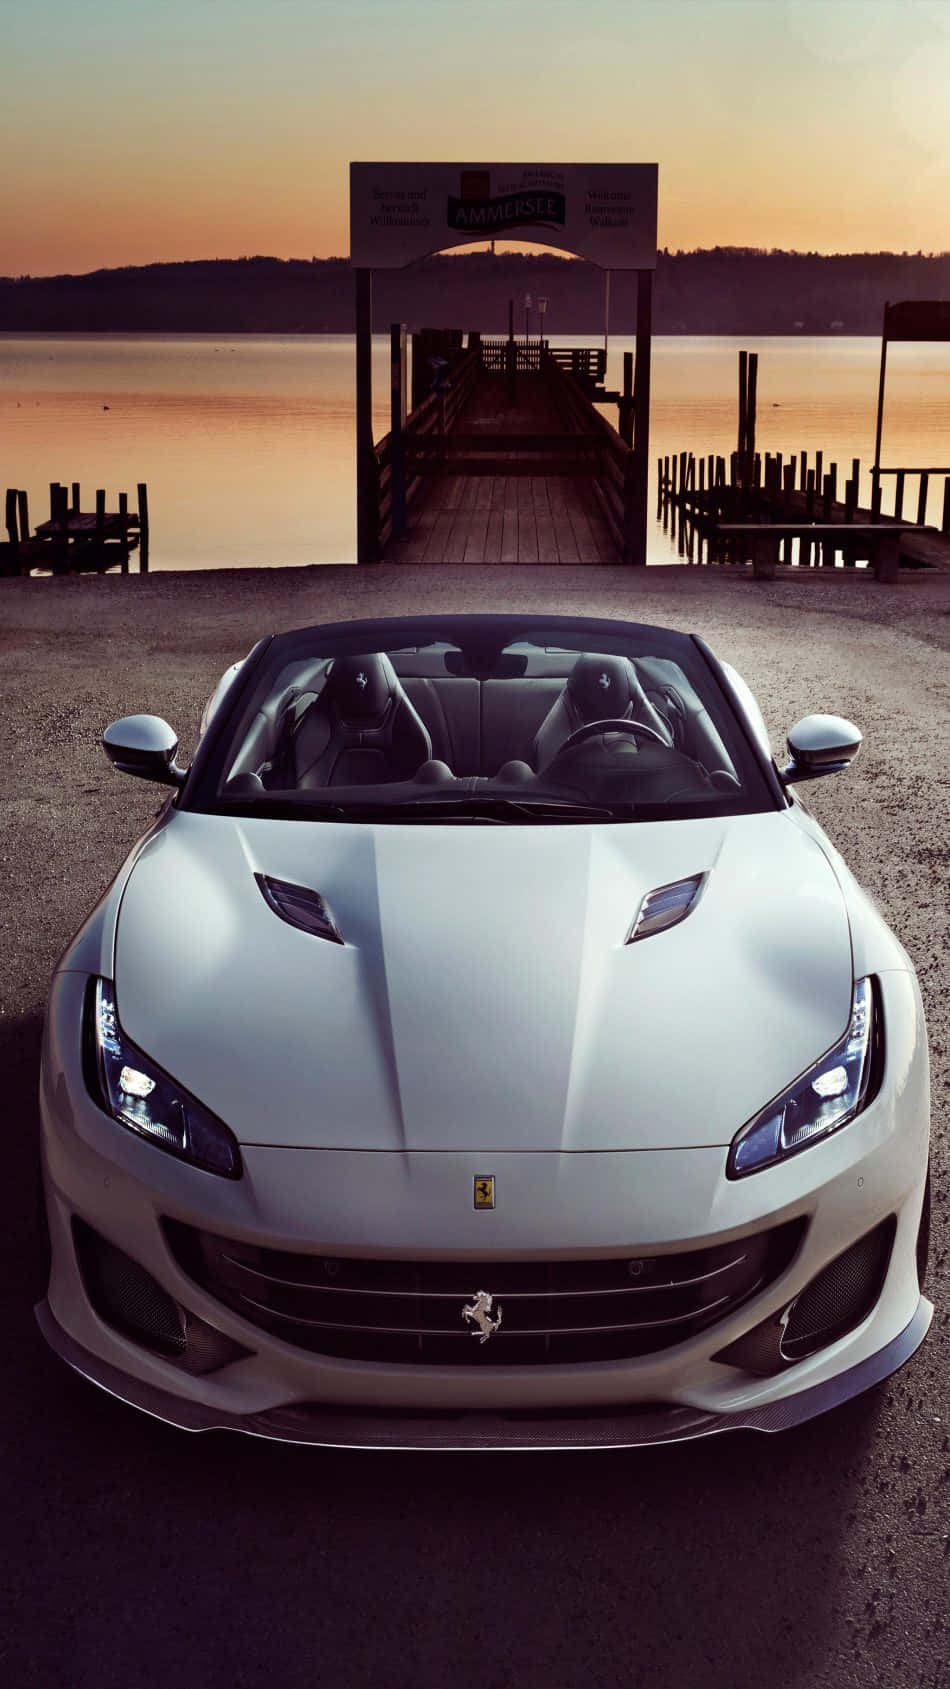 Sophistication and Style Combined - The White Ferrari iPhone Wallpaper